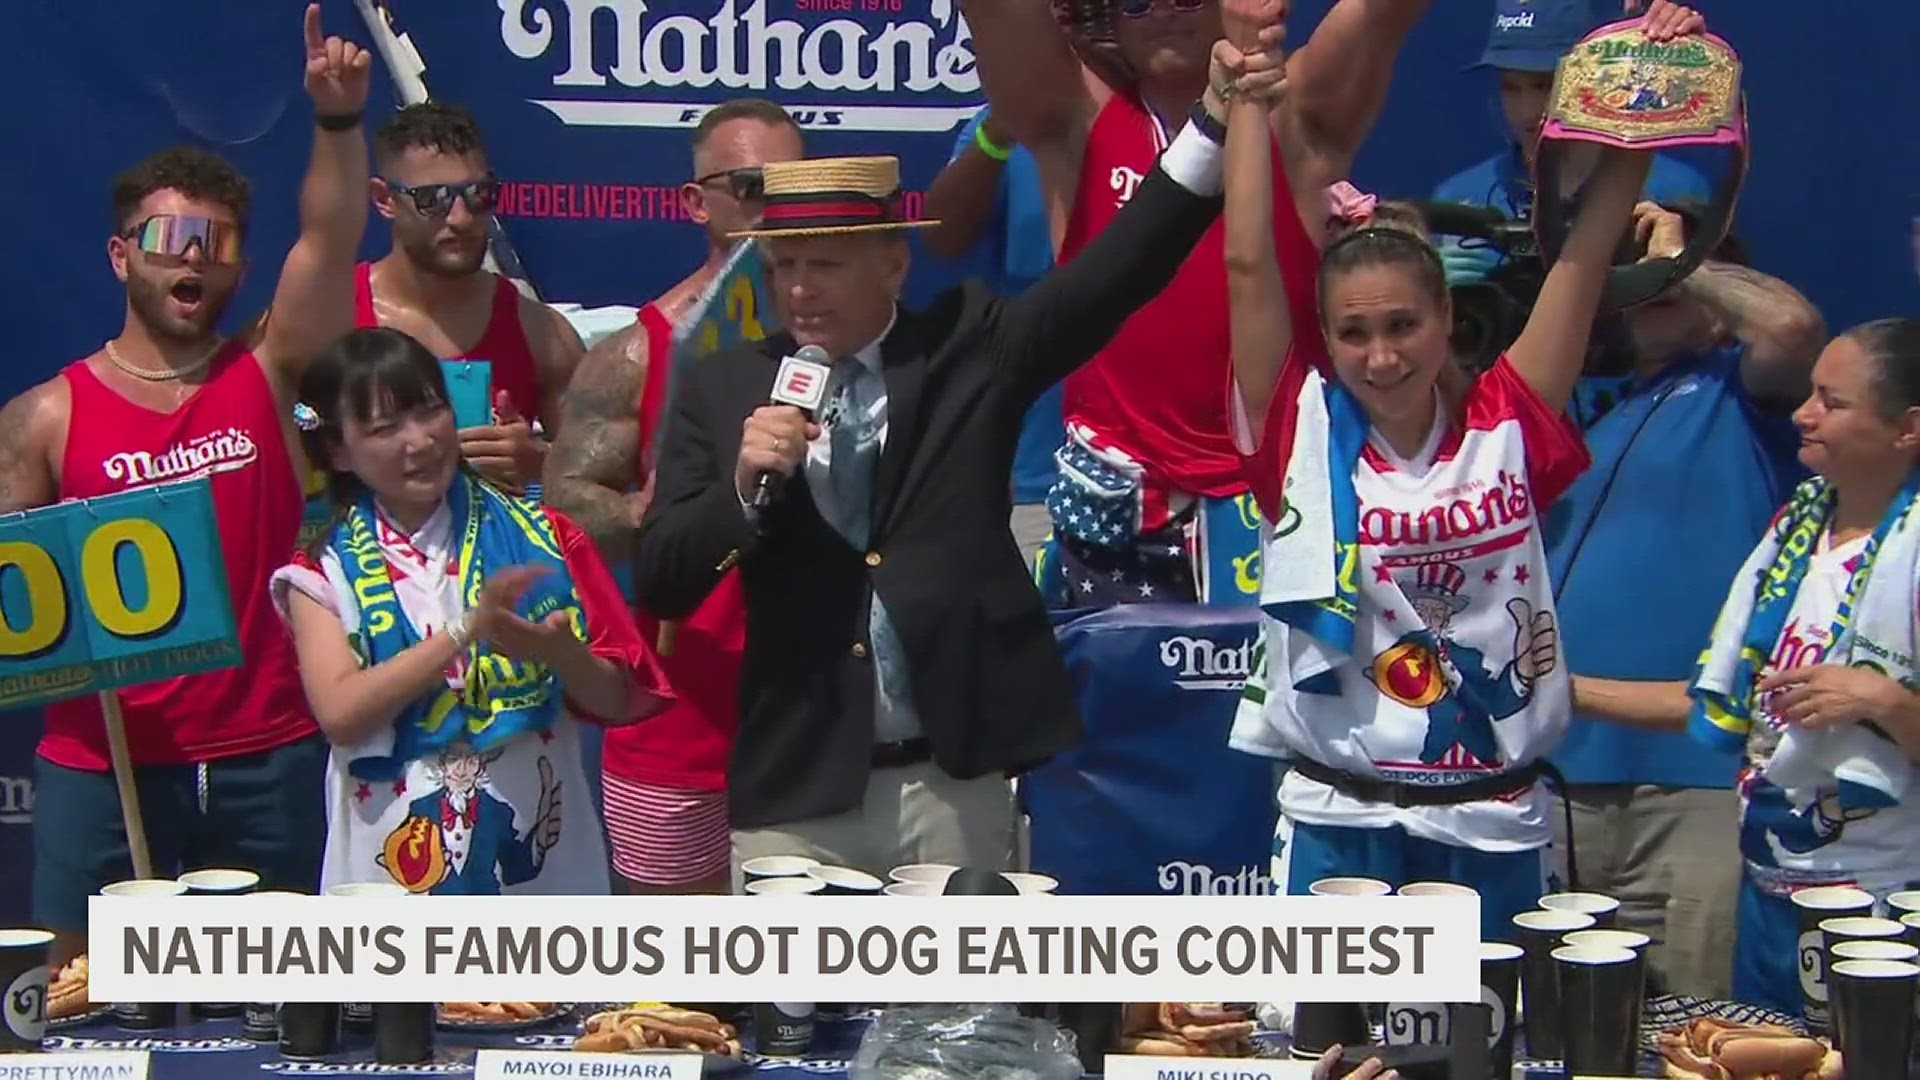 Miki Sudo won the women's division at 39 hot dogs and Joey Chestnut won the men's at 62.